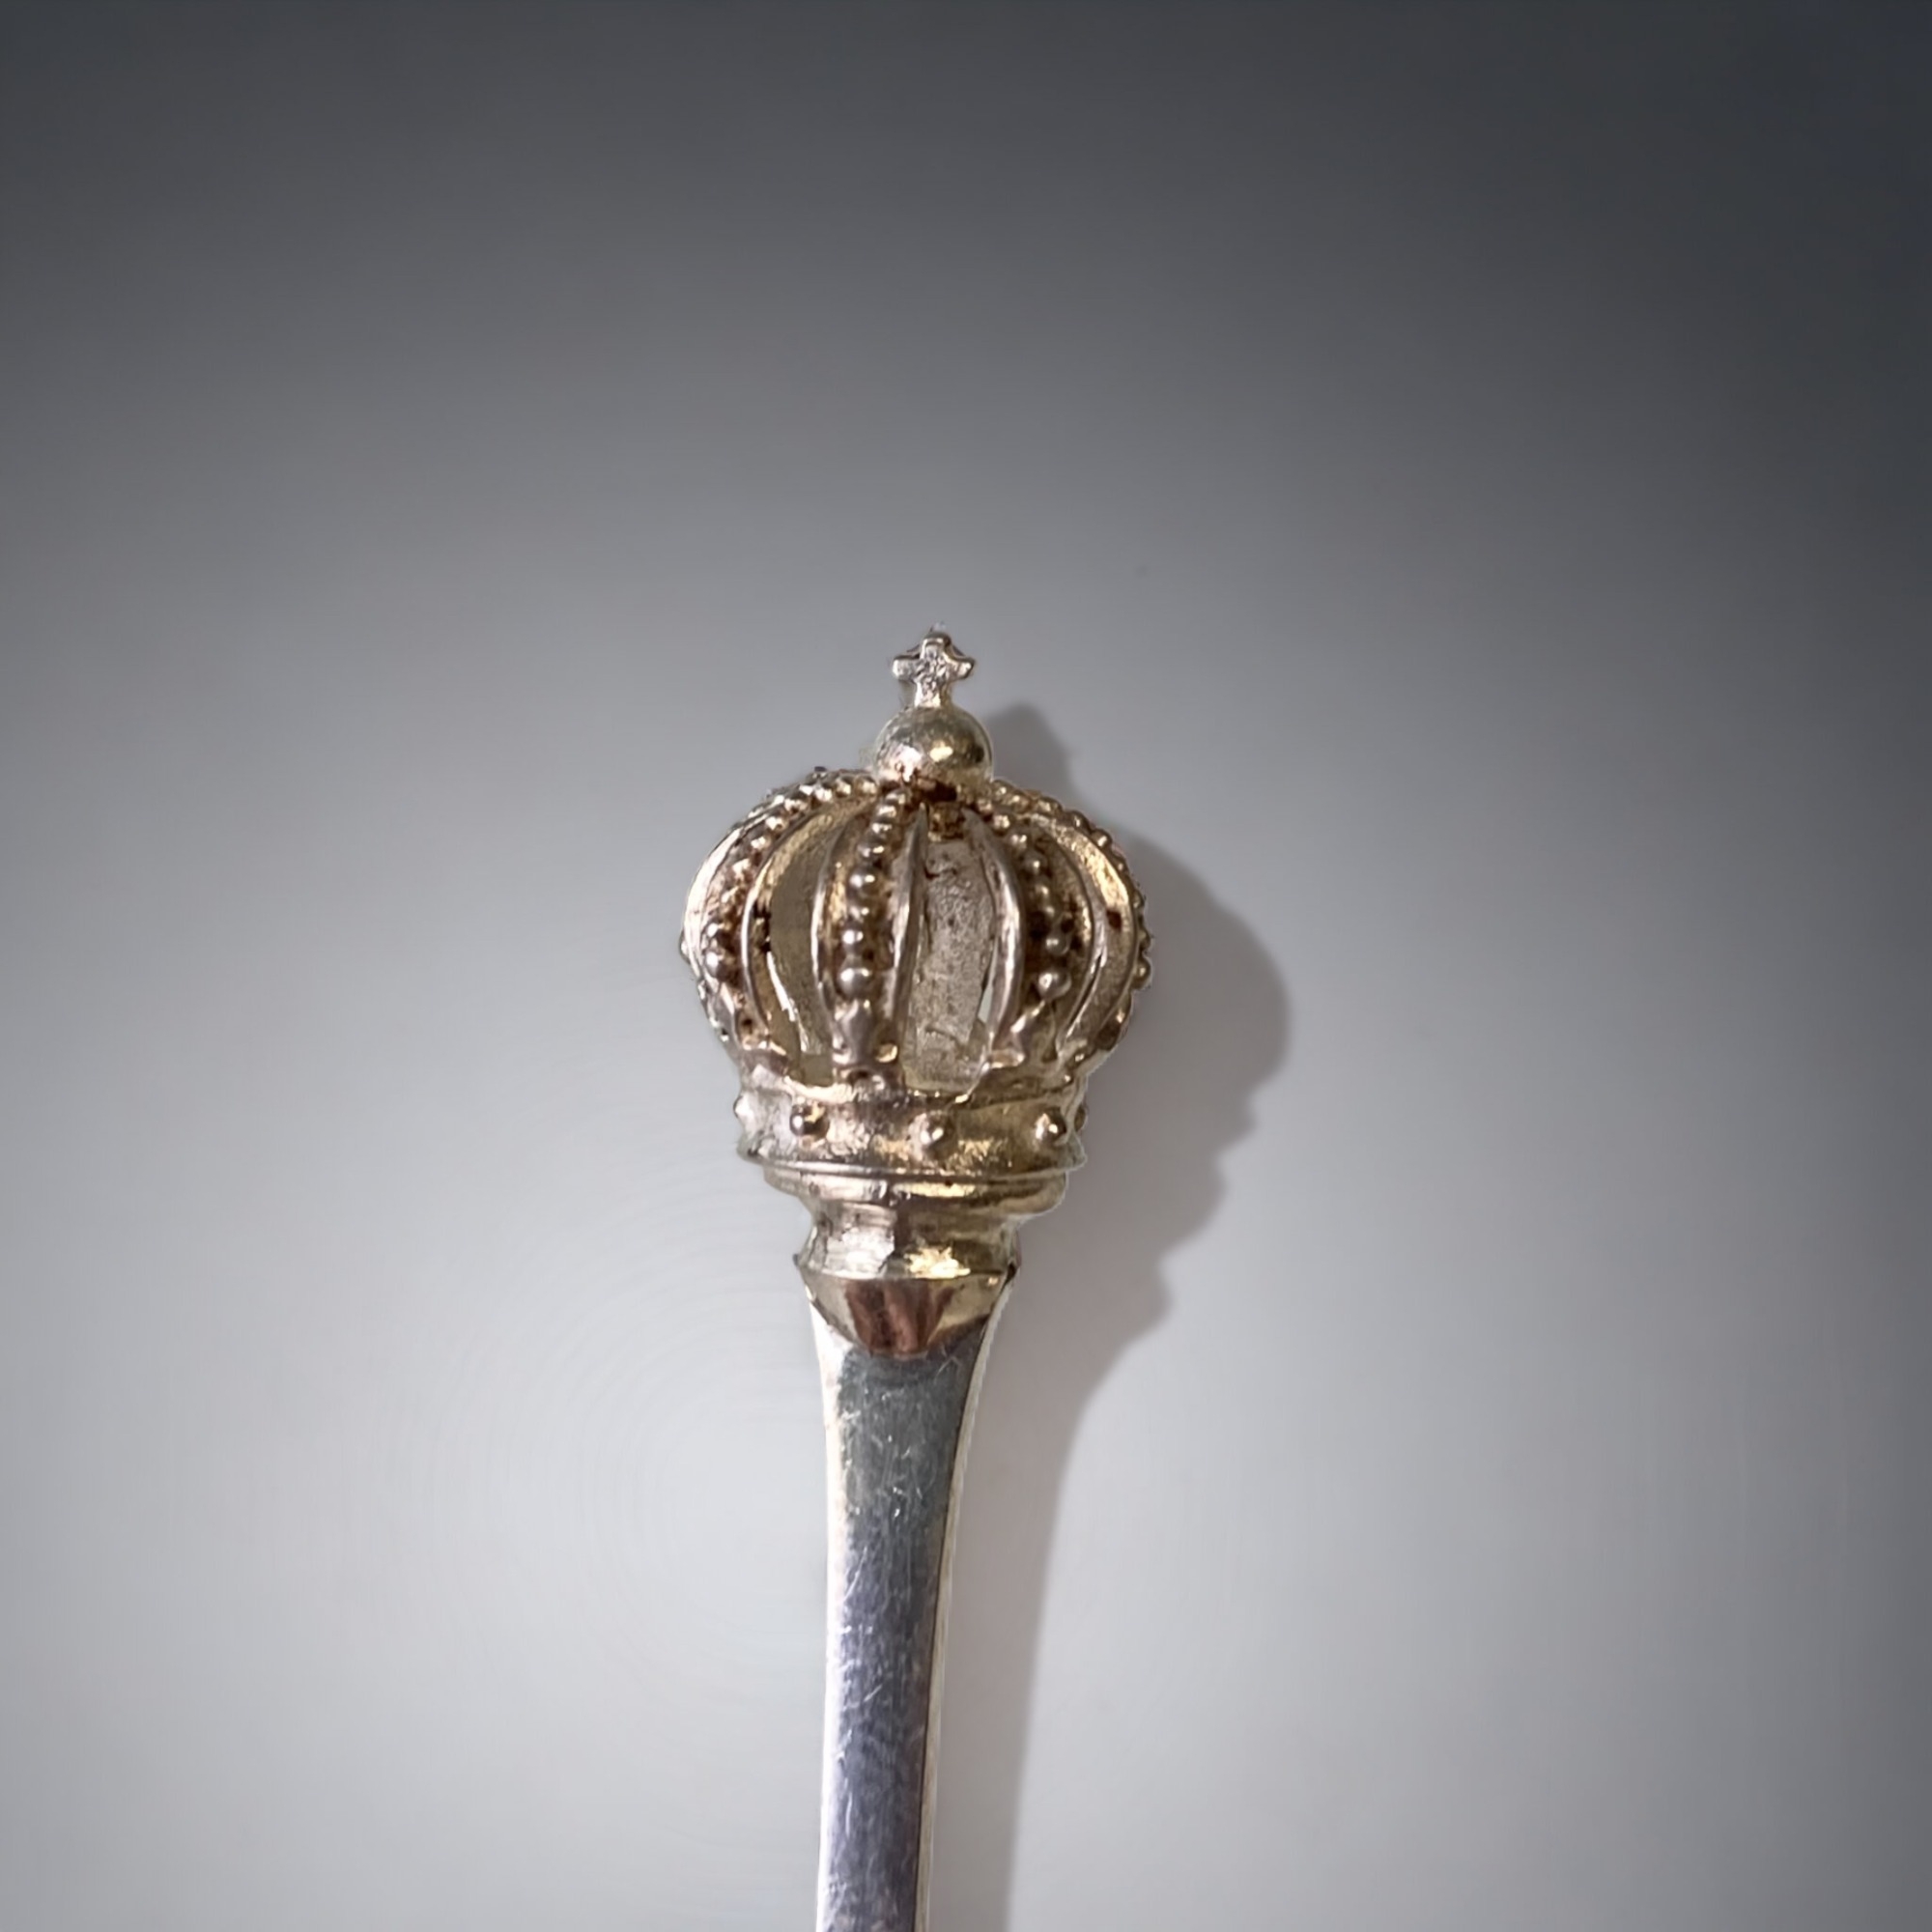 A STERLING SILVER BERNHARD HERTZ, DENMARK CROWN TEASPOON, TOGETHER WITH STERLING SILVER CADDY SPOON. - Image 2 of 5